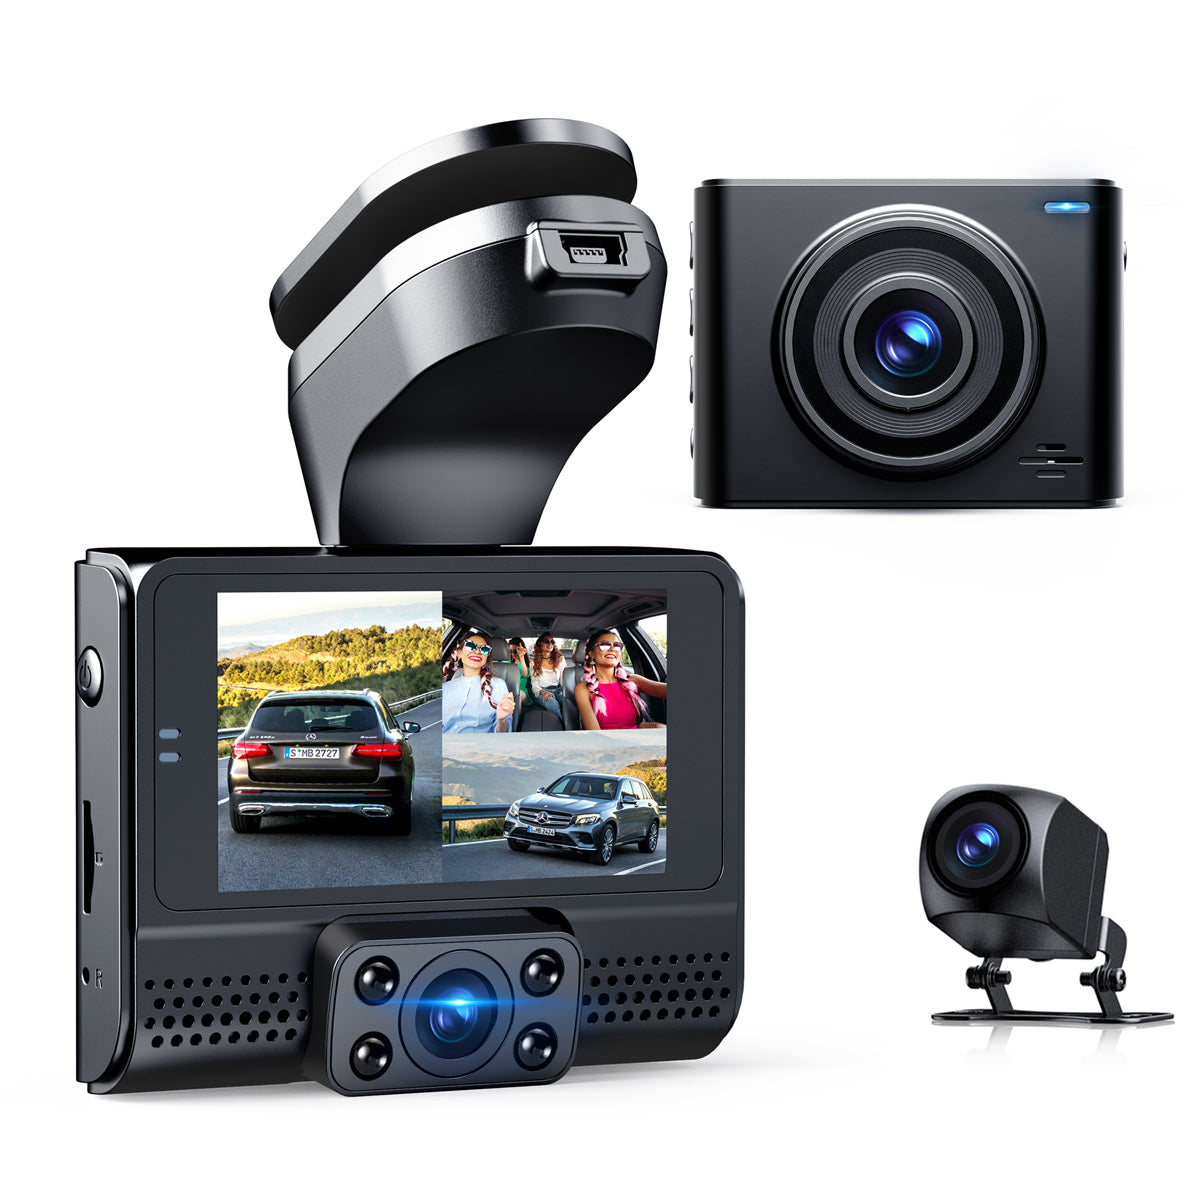 GOODTS Dash Cam 1080p FHD Car Camera Recorder 2.45 inch LCD Screen 170Wide Angle, Dash Camera for Cars with G-Sensor Loop Recording WDR Motion